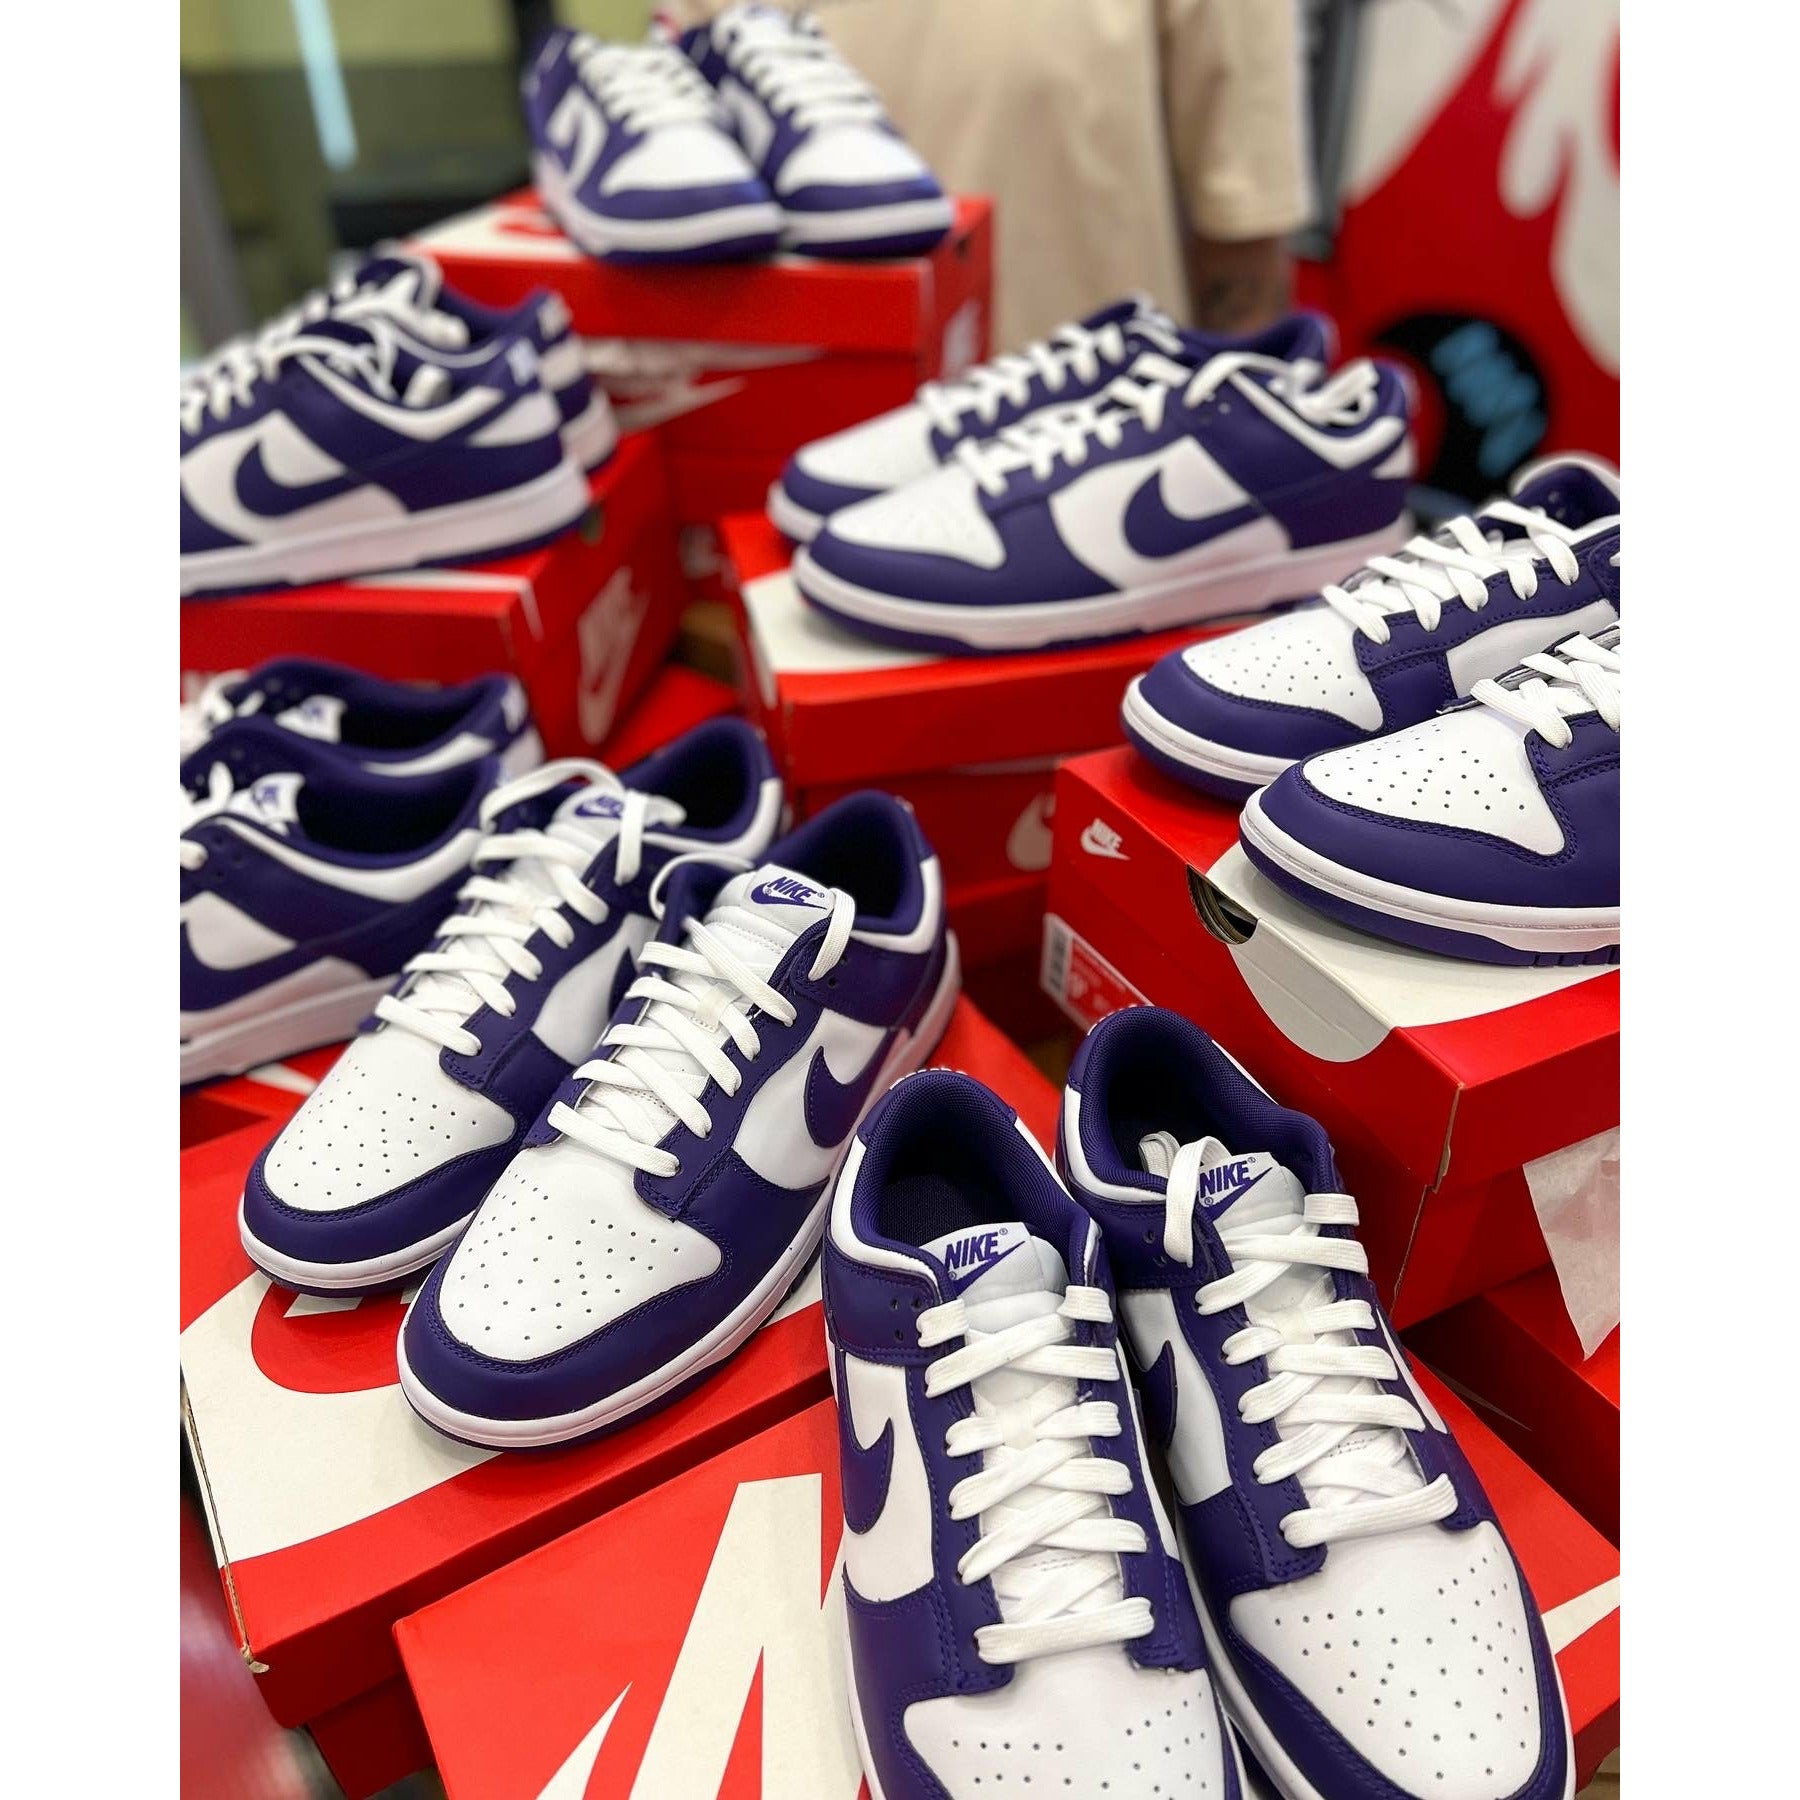 Nike Dunk Low Championship Court Purple by Nike from £102.00